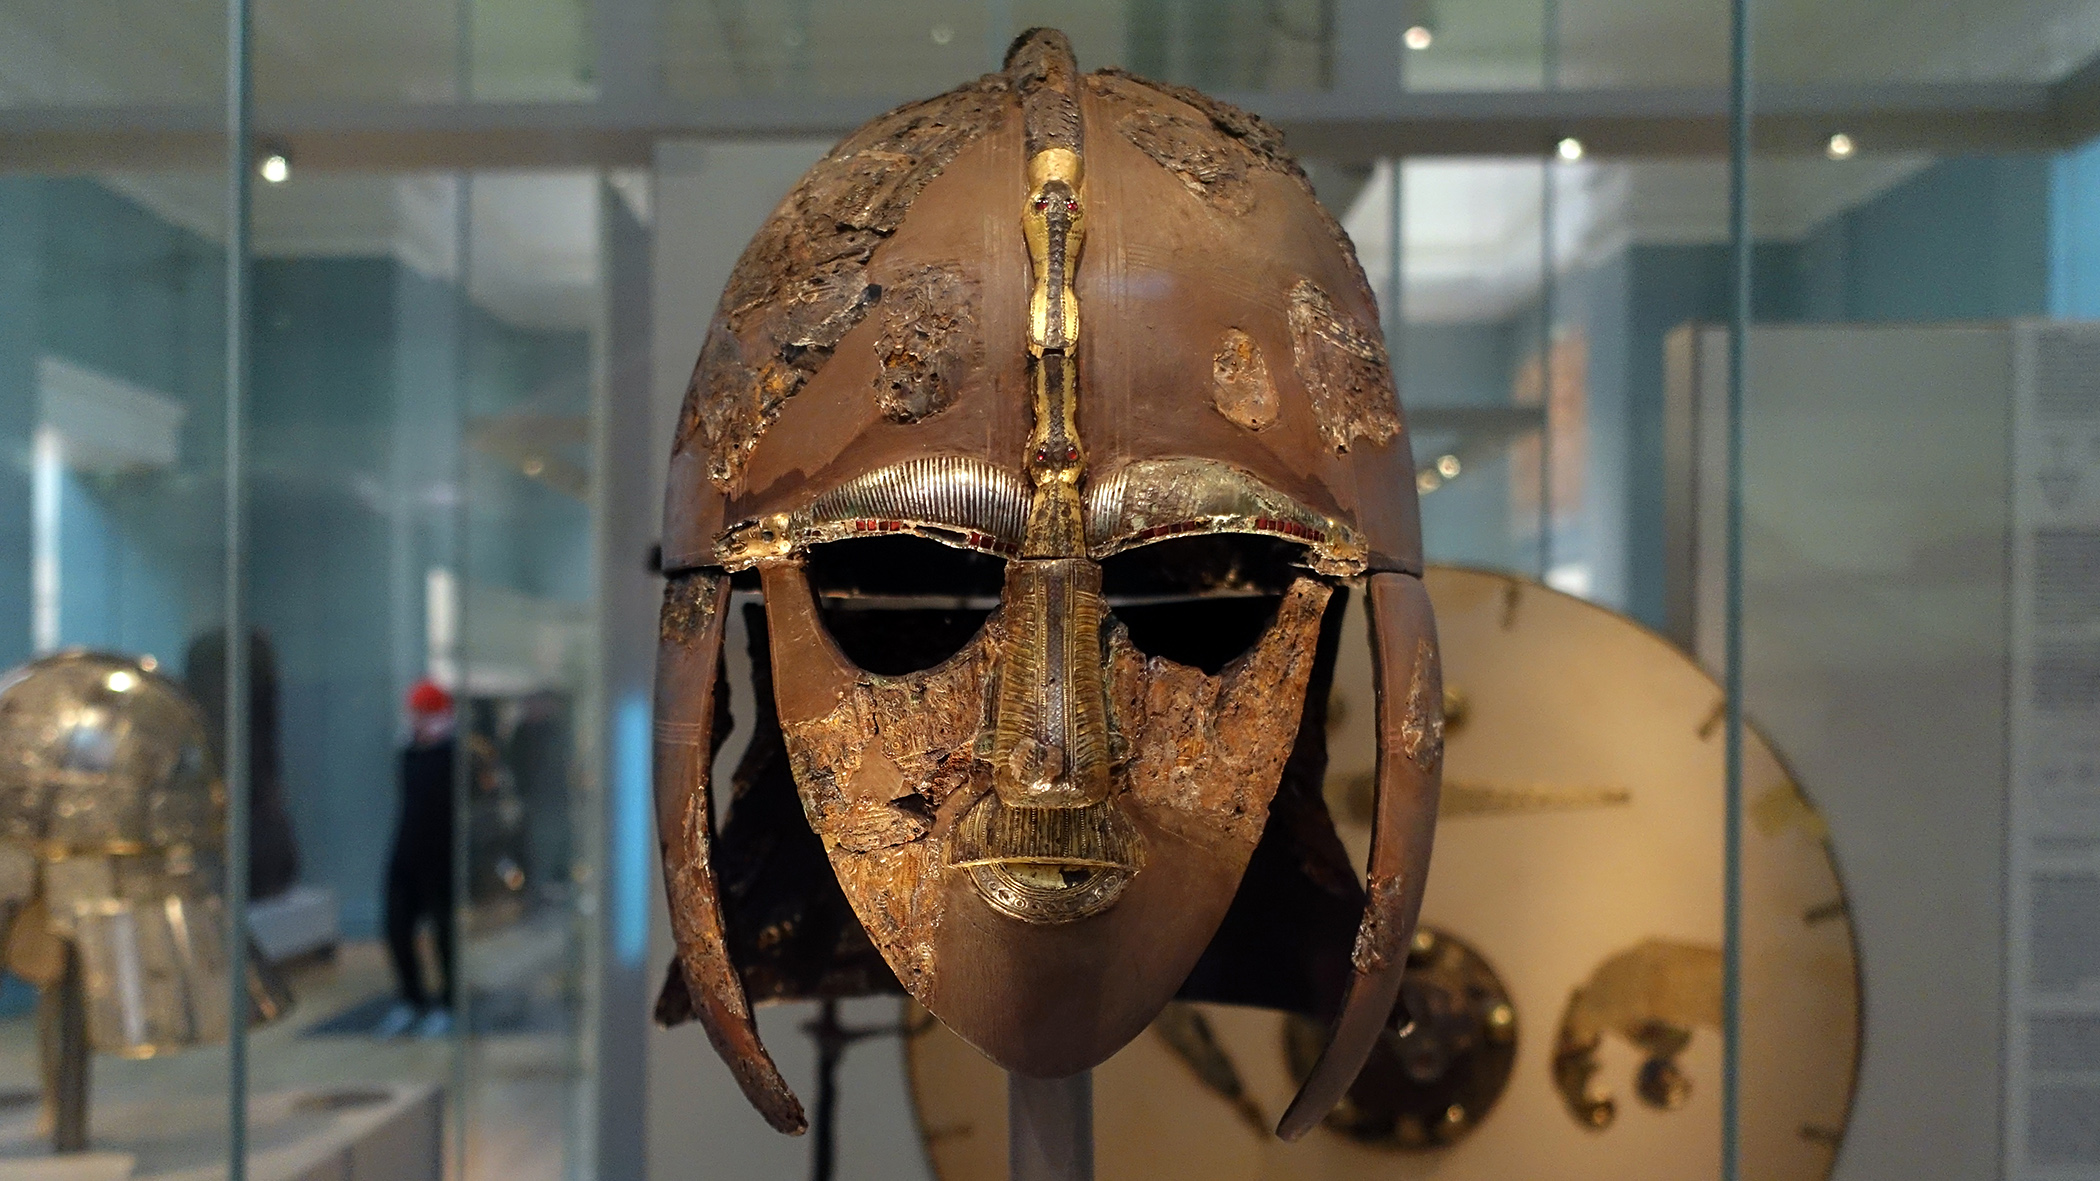 The Sutton Hoo helmet, early 7th century, iron and tinned copper alloy helmet, consisting of many pieces of iron, now built into a reconstruction, 31.8 x 21.5 cm (as restored) (The British Museum) (photo: Steven Zucker, CC BY-NC-SA 2.0)